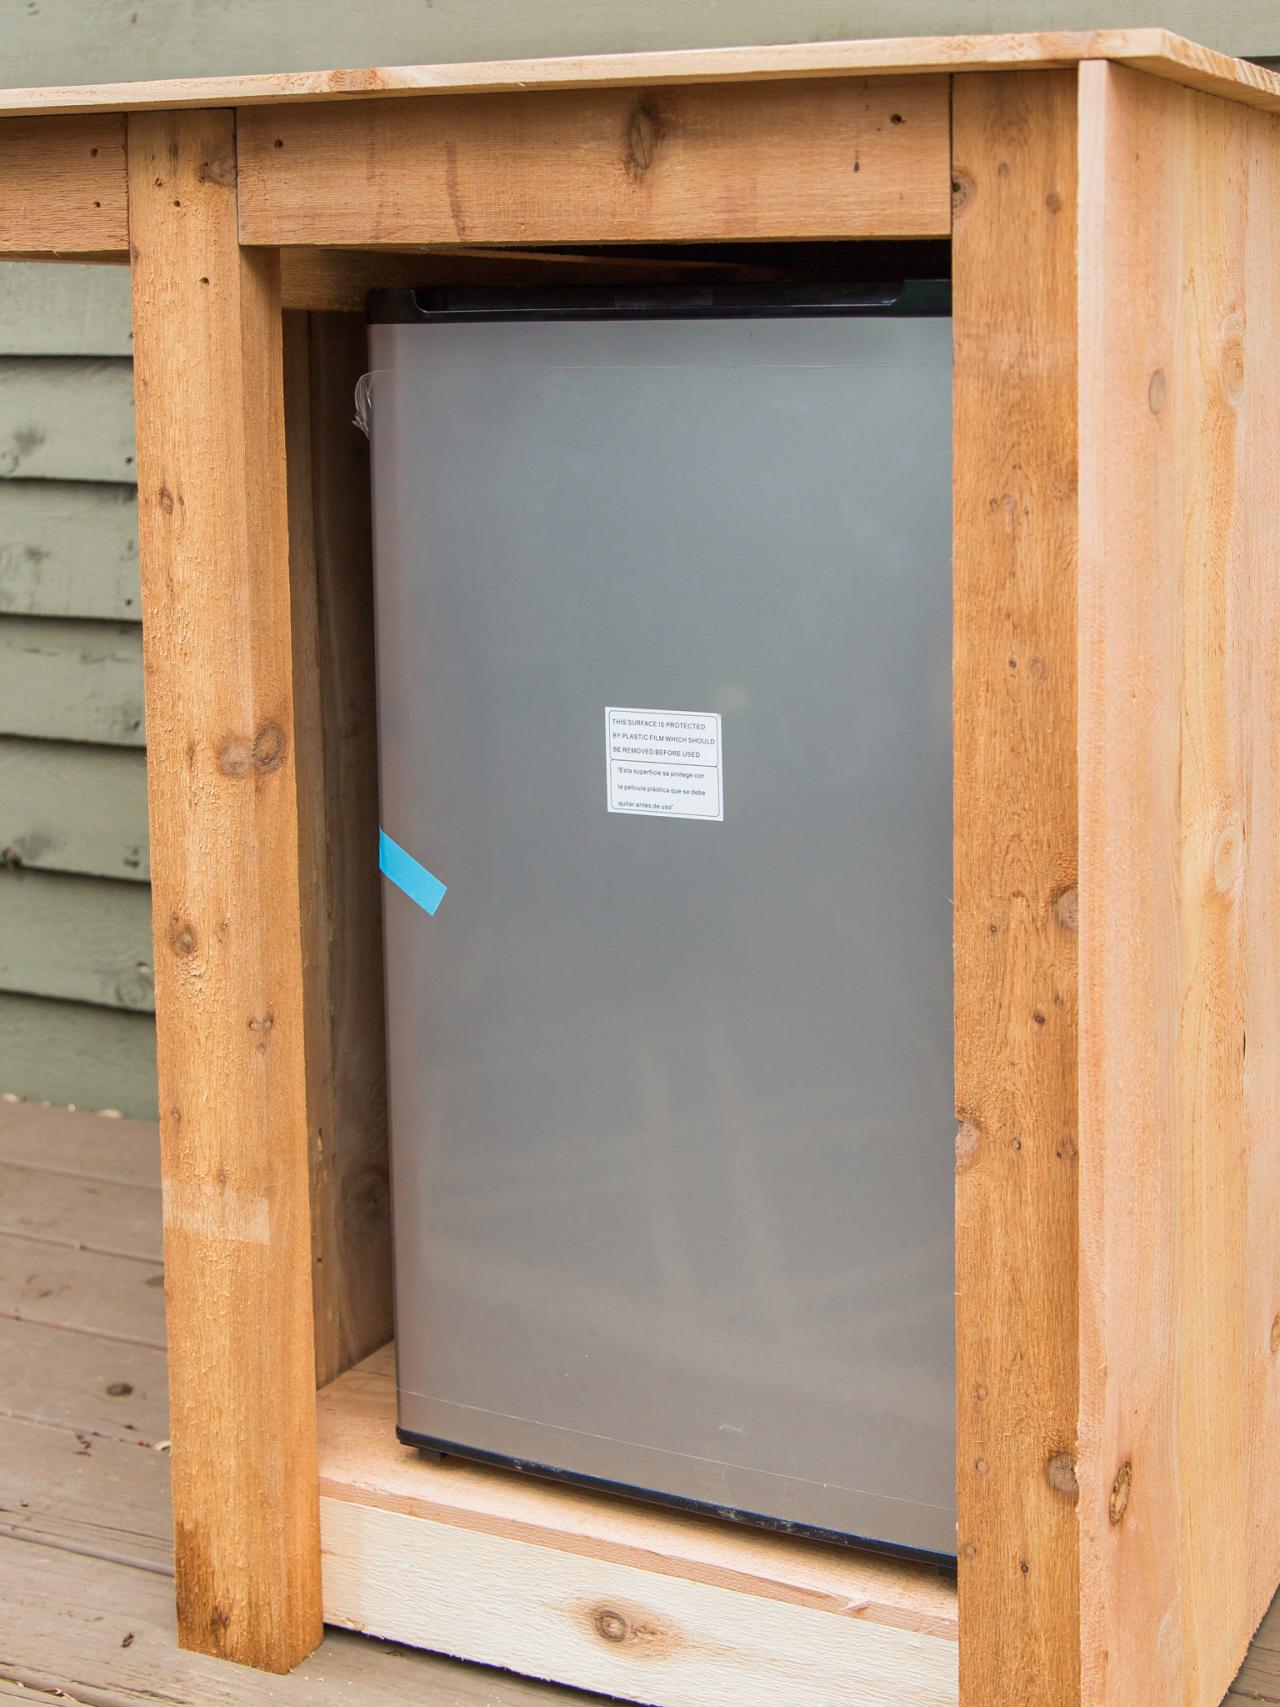 How To Build An Outdoor Minibar, Mini Refrigerator Cabinet Surround